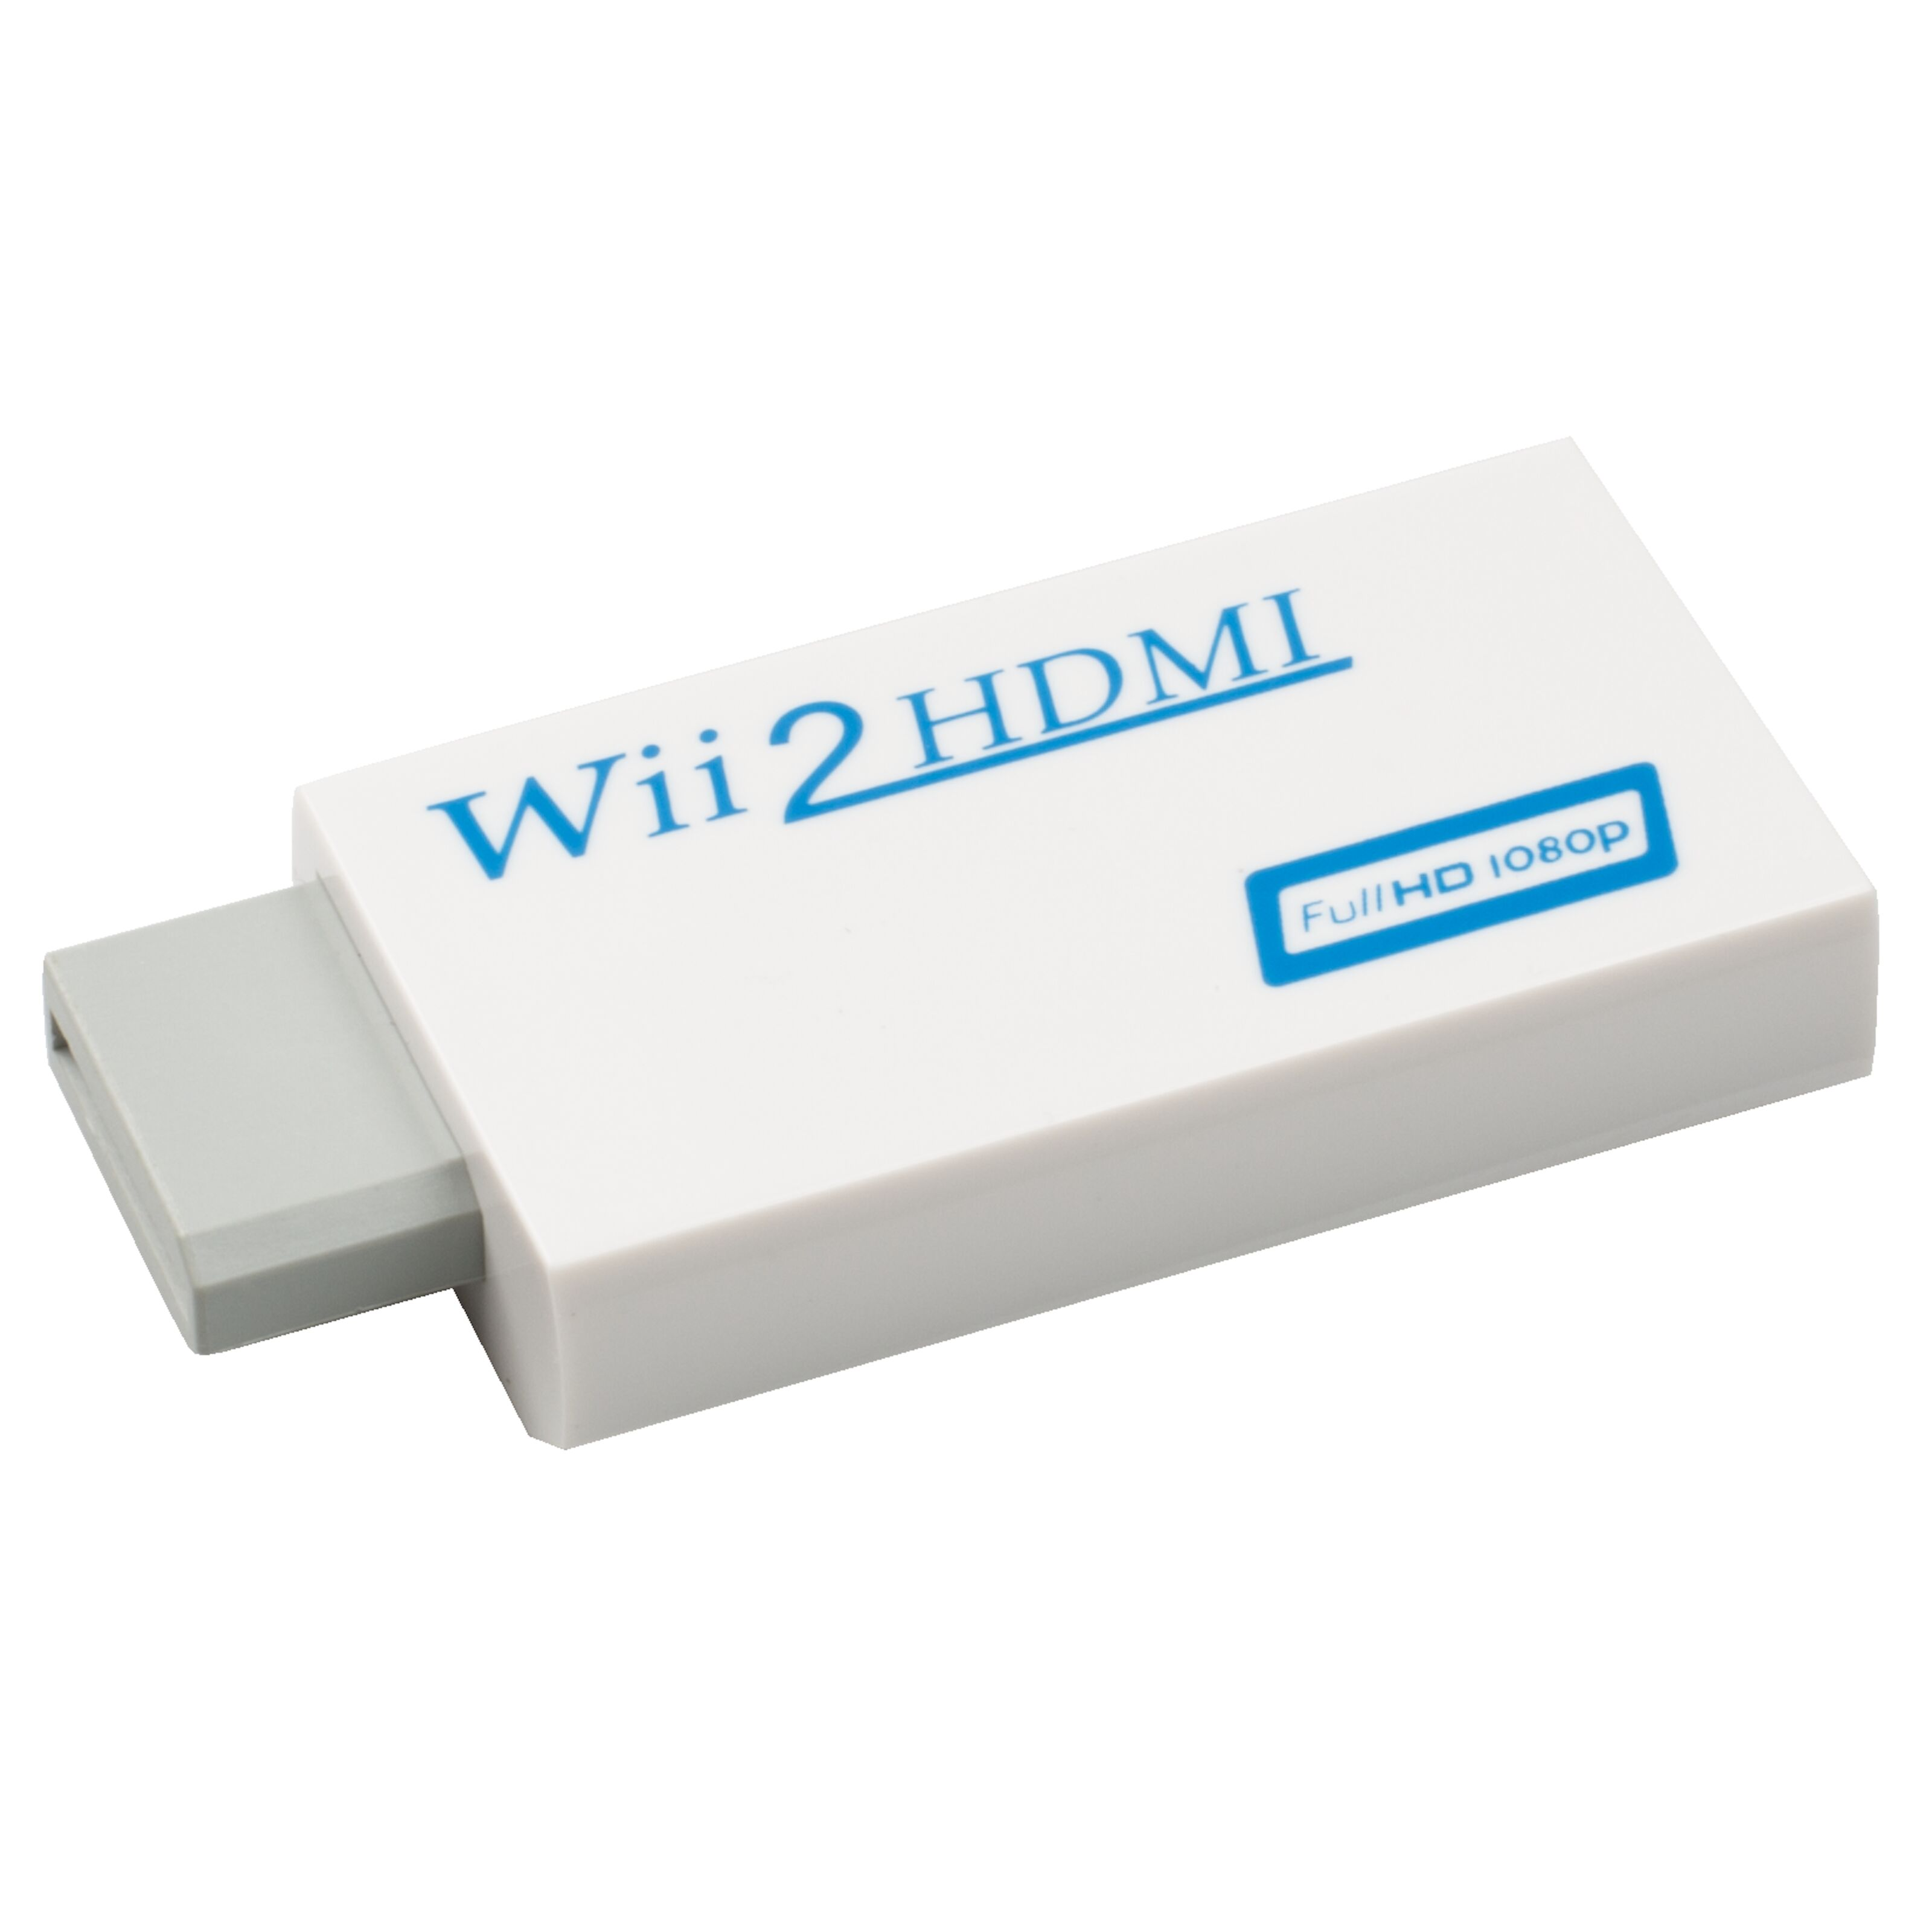 BITFUNX Wii HDMI Adapter - Supports NTSC and PAL Consoles, Supports  Component Output, Plug & Play Video Game Adapter with No Lag, HDMI Adapter  for Wii